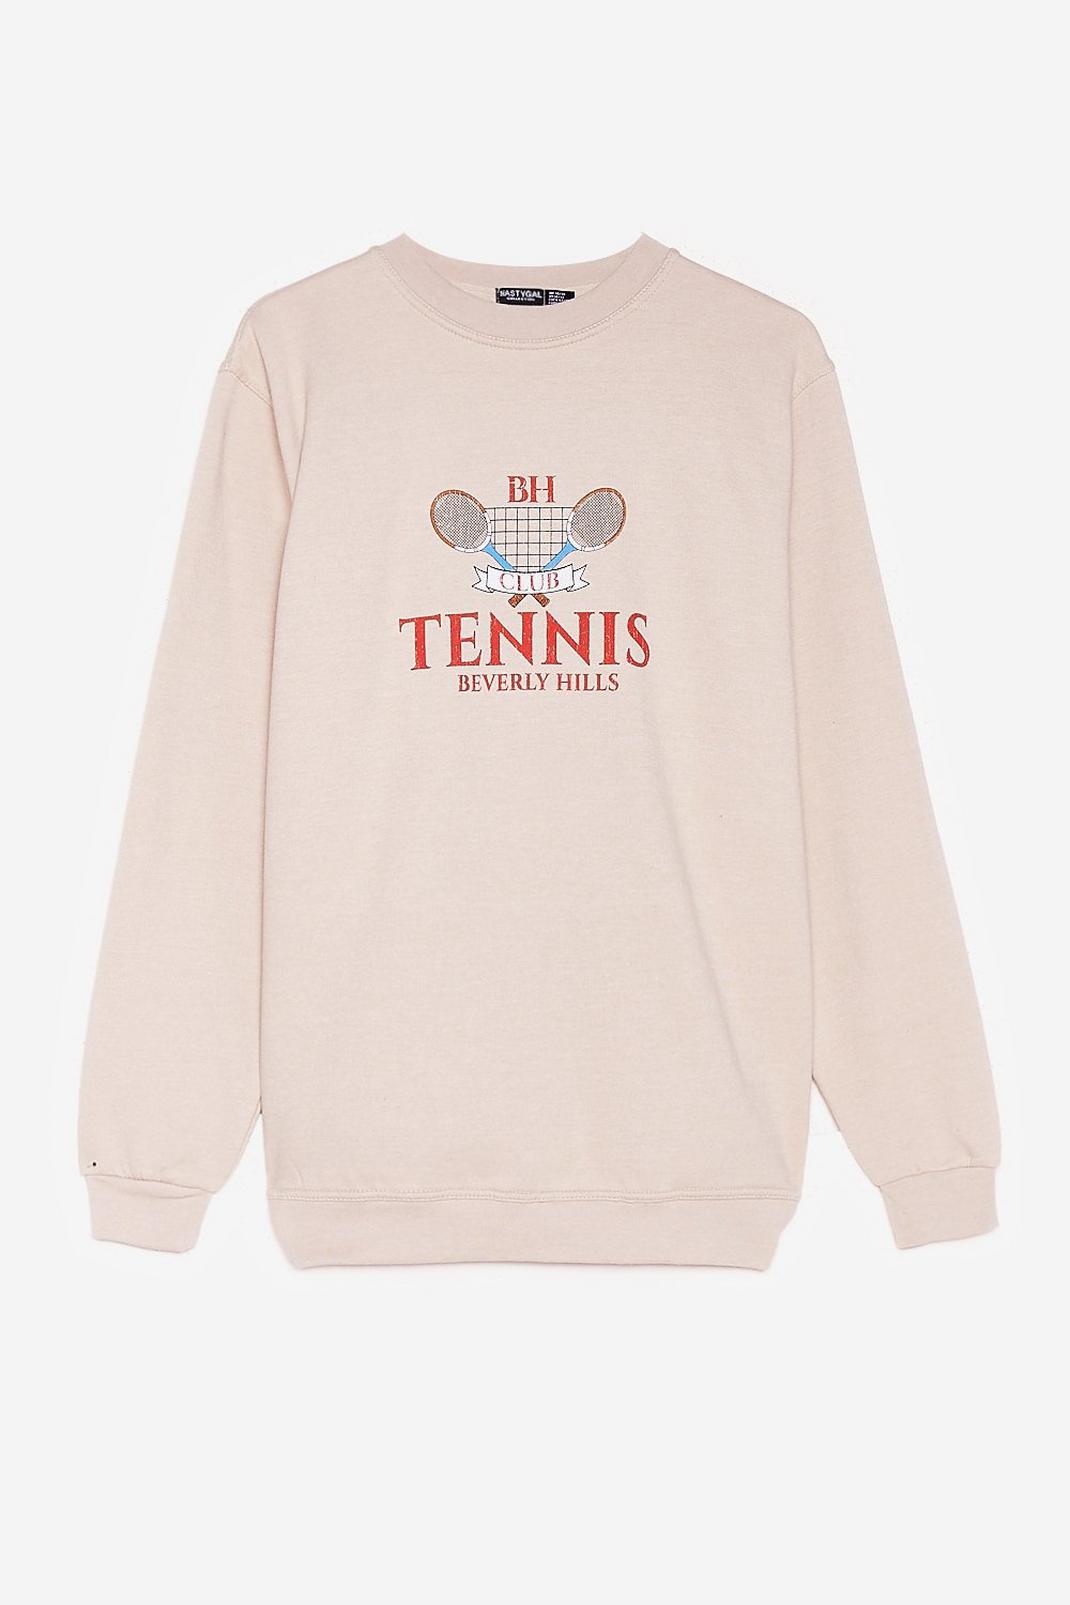 Sand Cause a Racquet Plus Tennis Graphic Sweatshirt image number 1